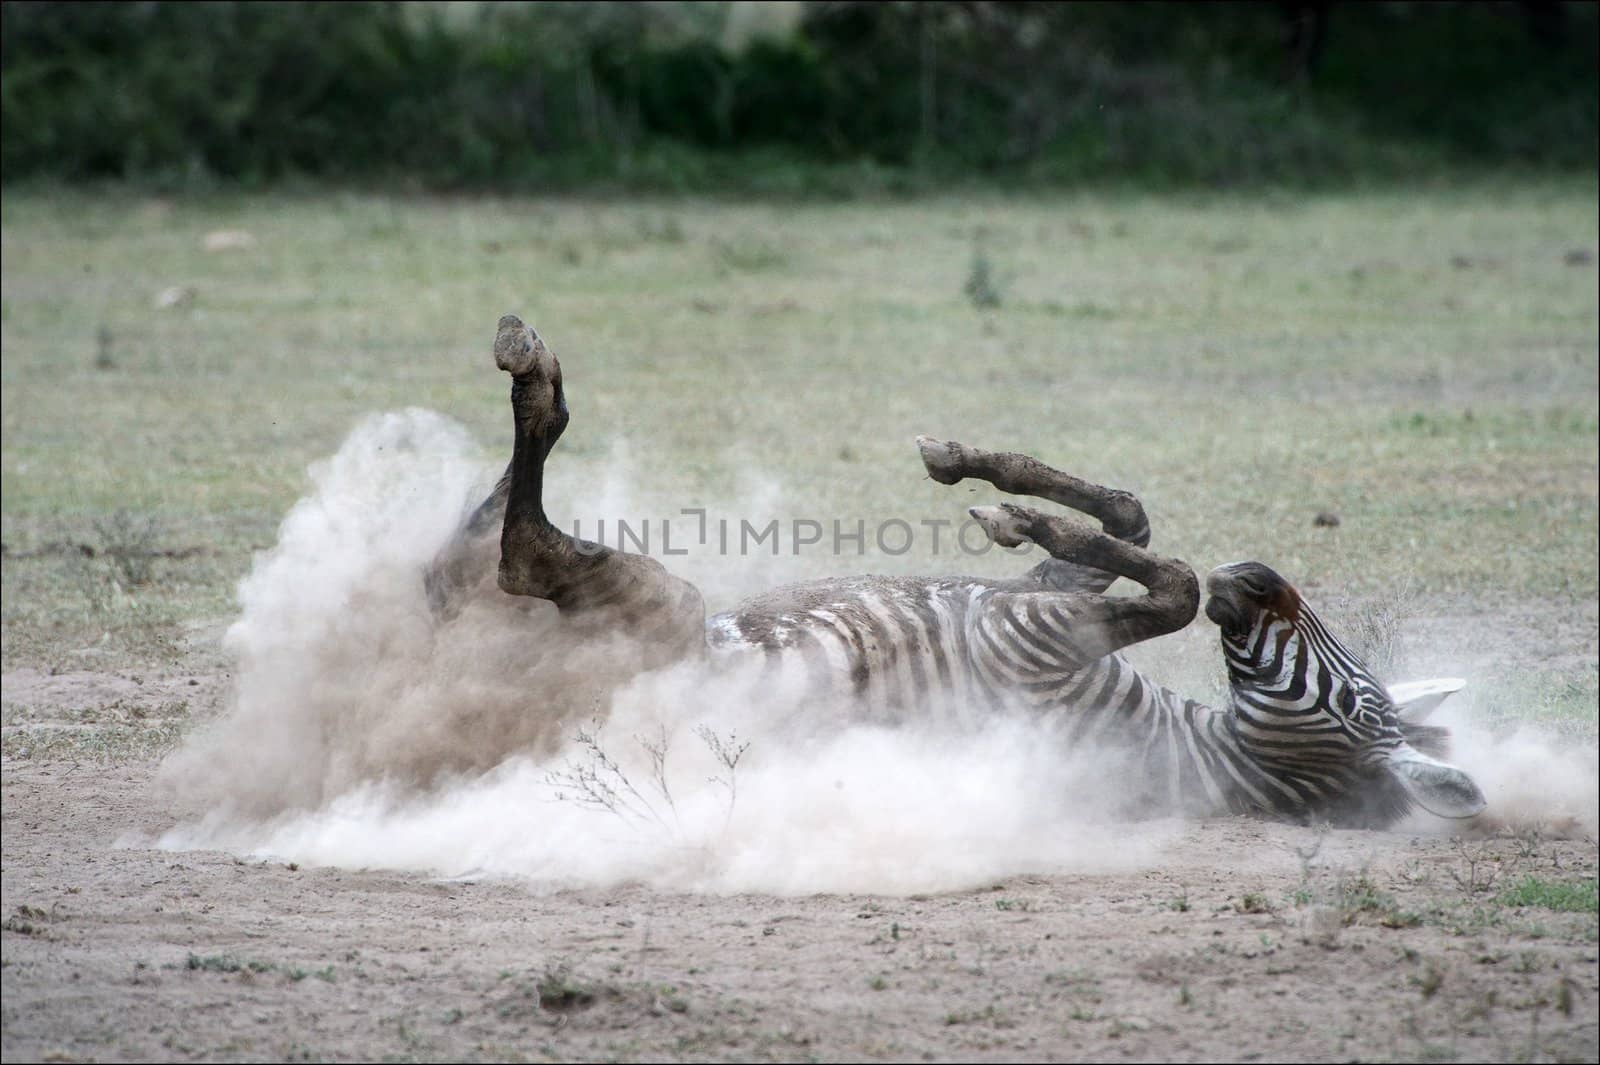 Zebra in a dust. The zebra goes for a drive by the ground, lifting dust clubs.